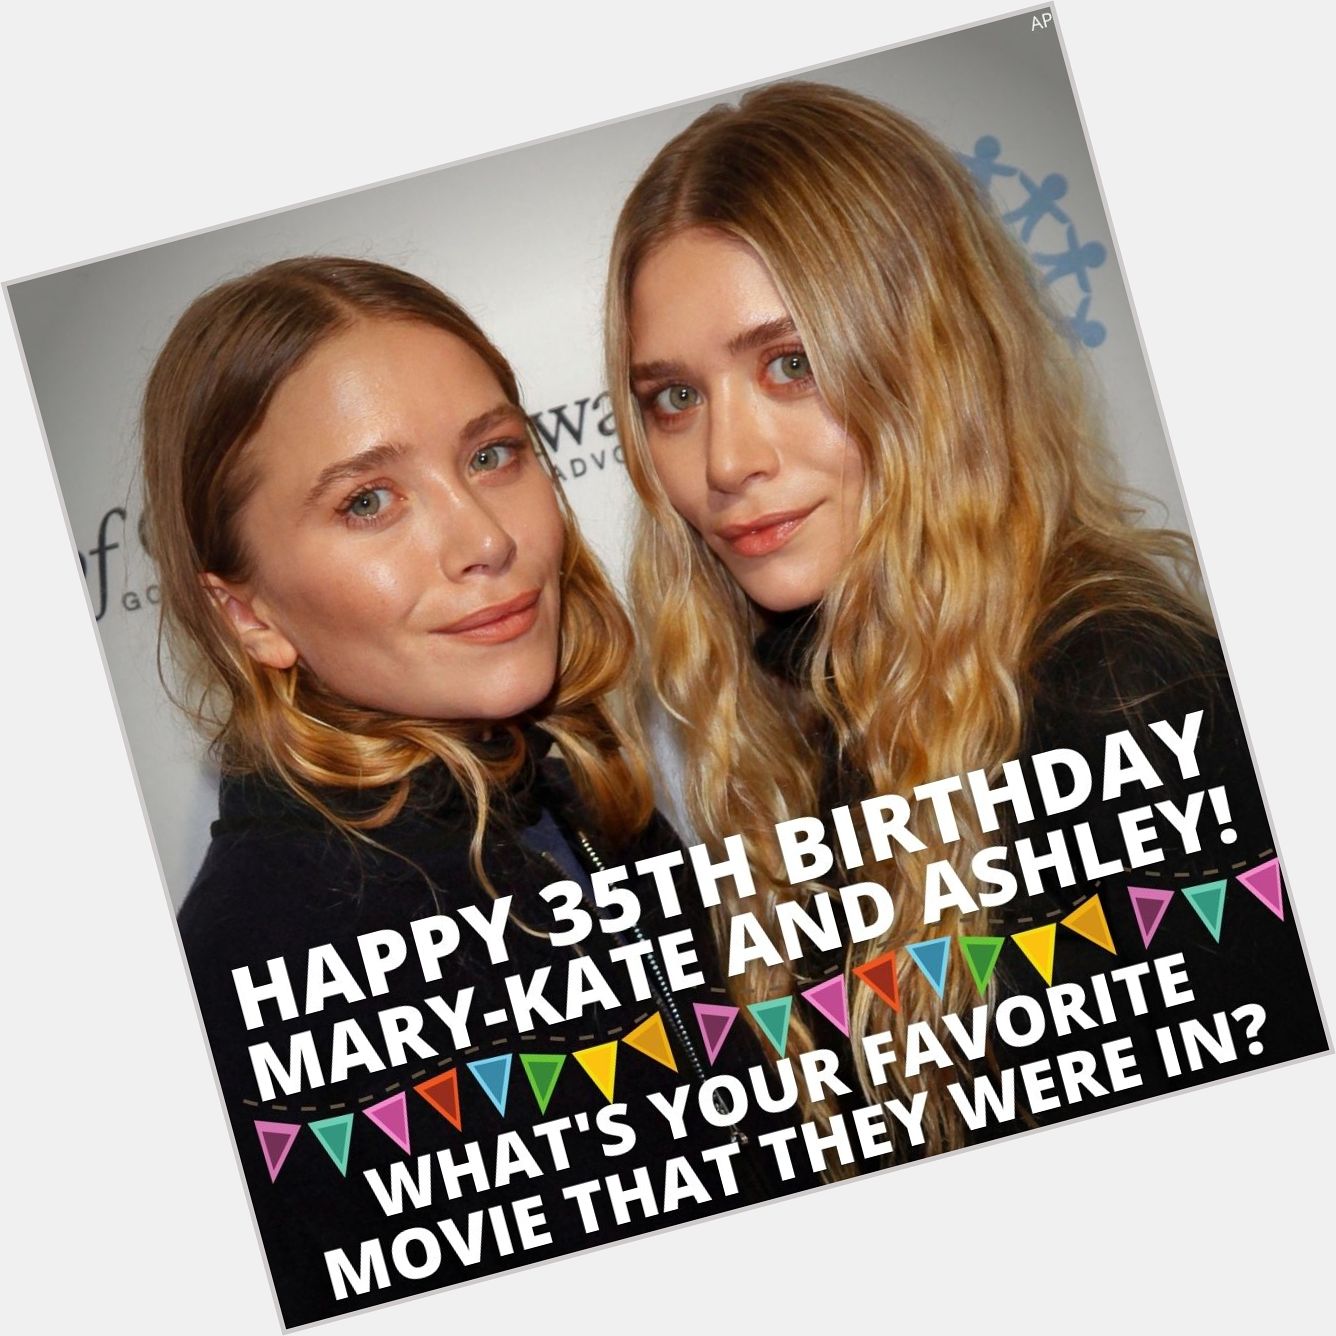 Happy birthday to Mary-Kate and Ashley Olsen!

The popular twins celebrate their 35th birthday today. 